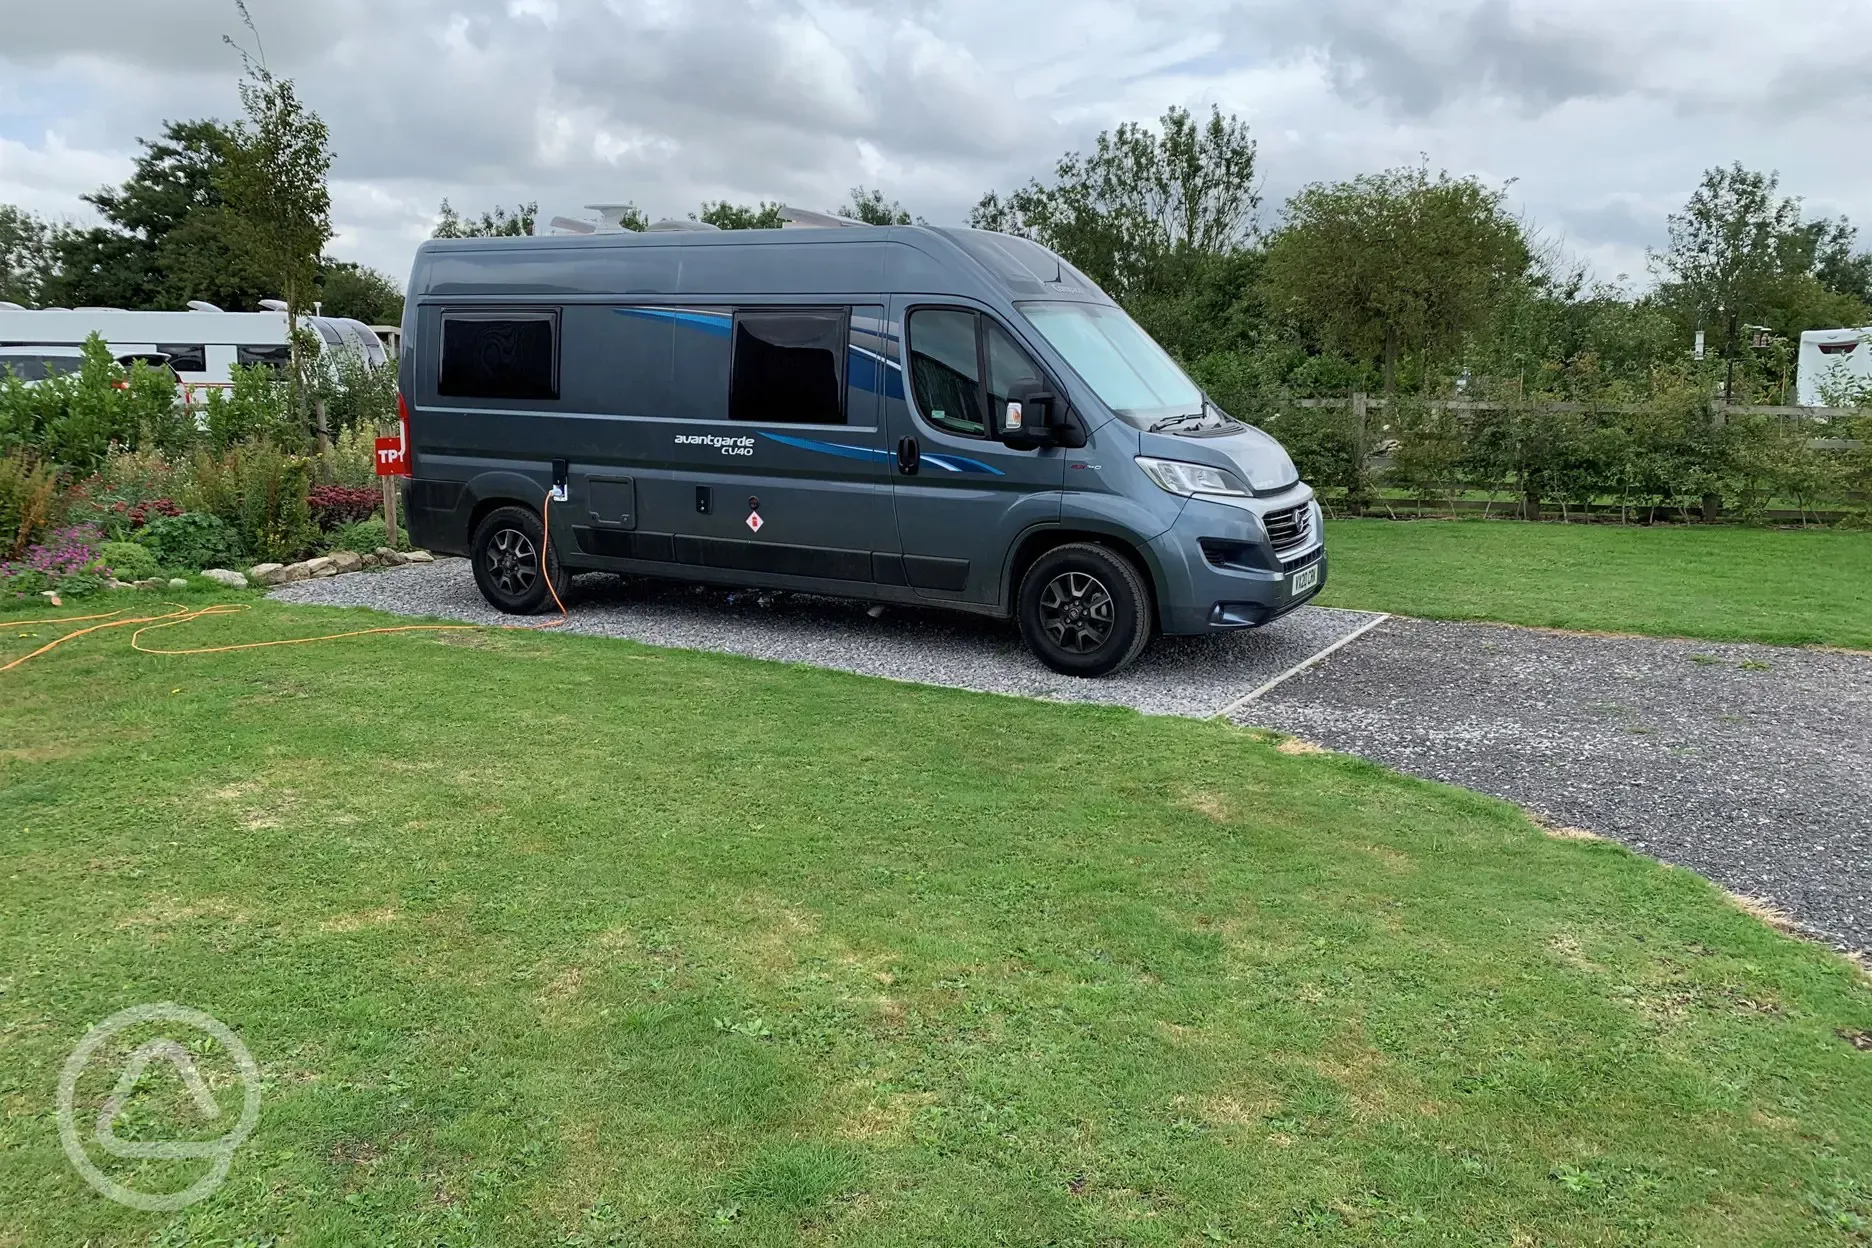 Motorhome Pitches